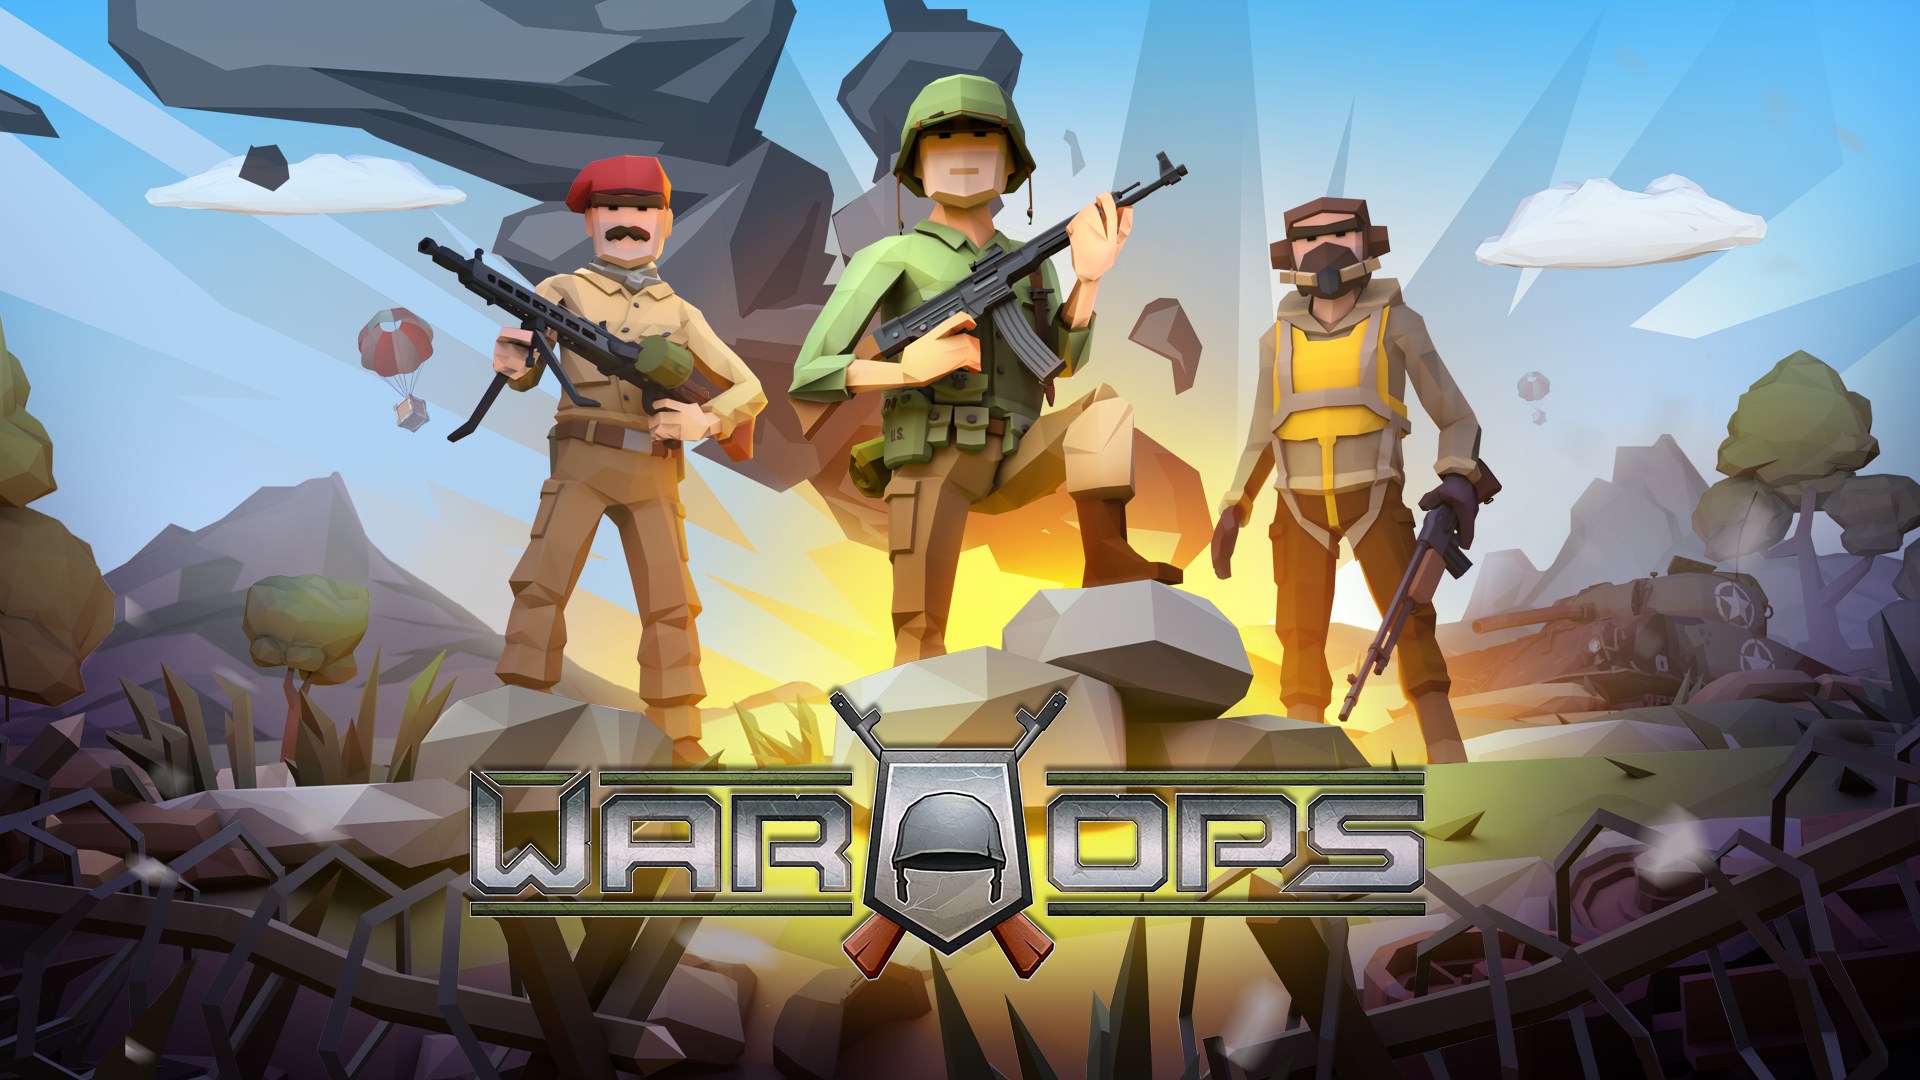 Play War Zone: Gun Shooting Games Online for Free on PC & Mobile